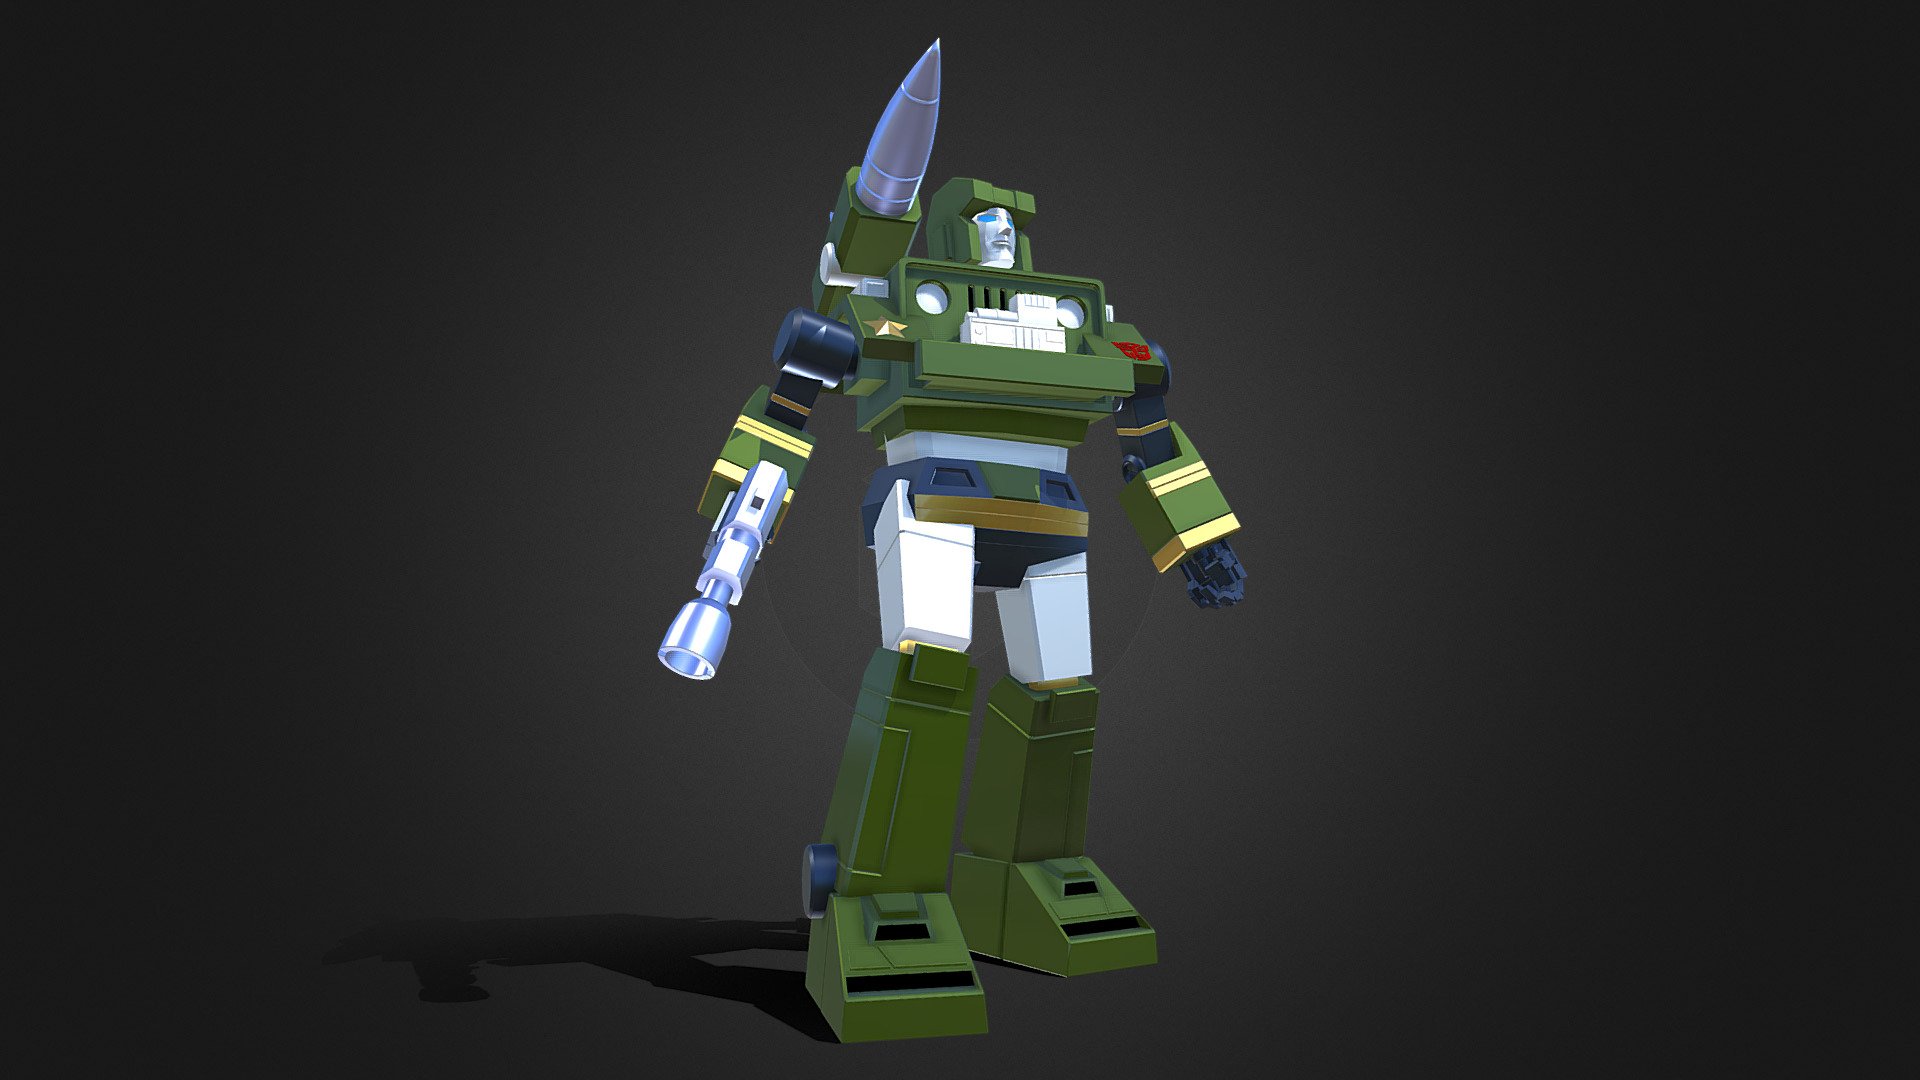 If you’re interested in purchasing any of my models, contact me @ andrewdisaacs@yahoo.com

Hound from Season 1 of the Transformers G1 cartoon.

Made by myself in 3DS Max 3d model